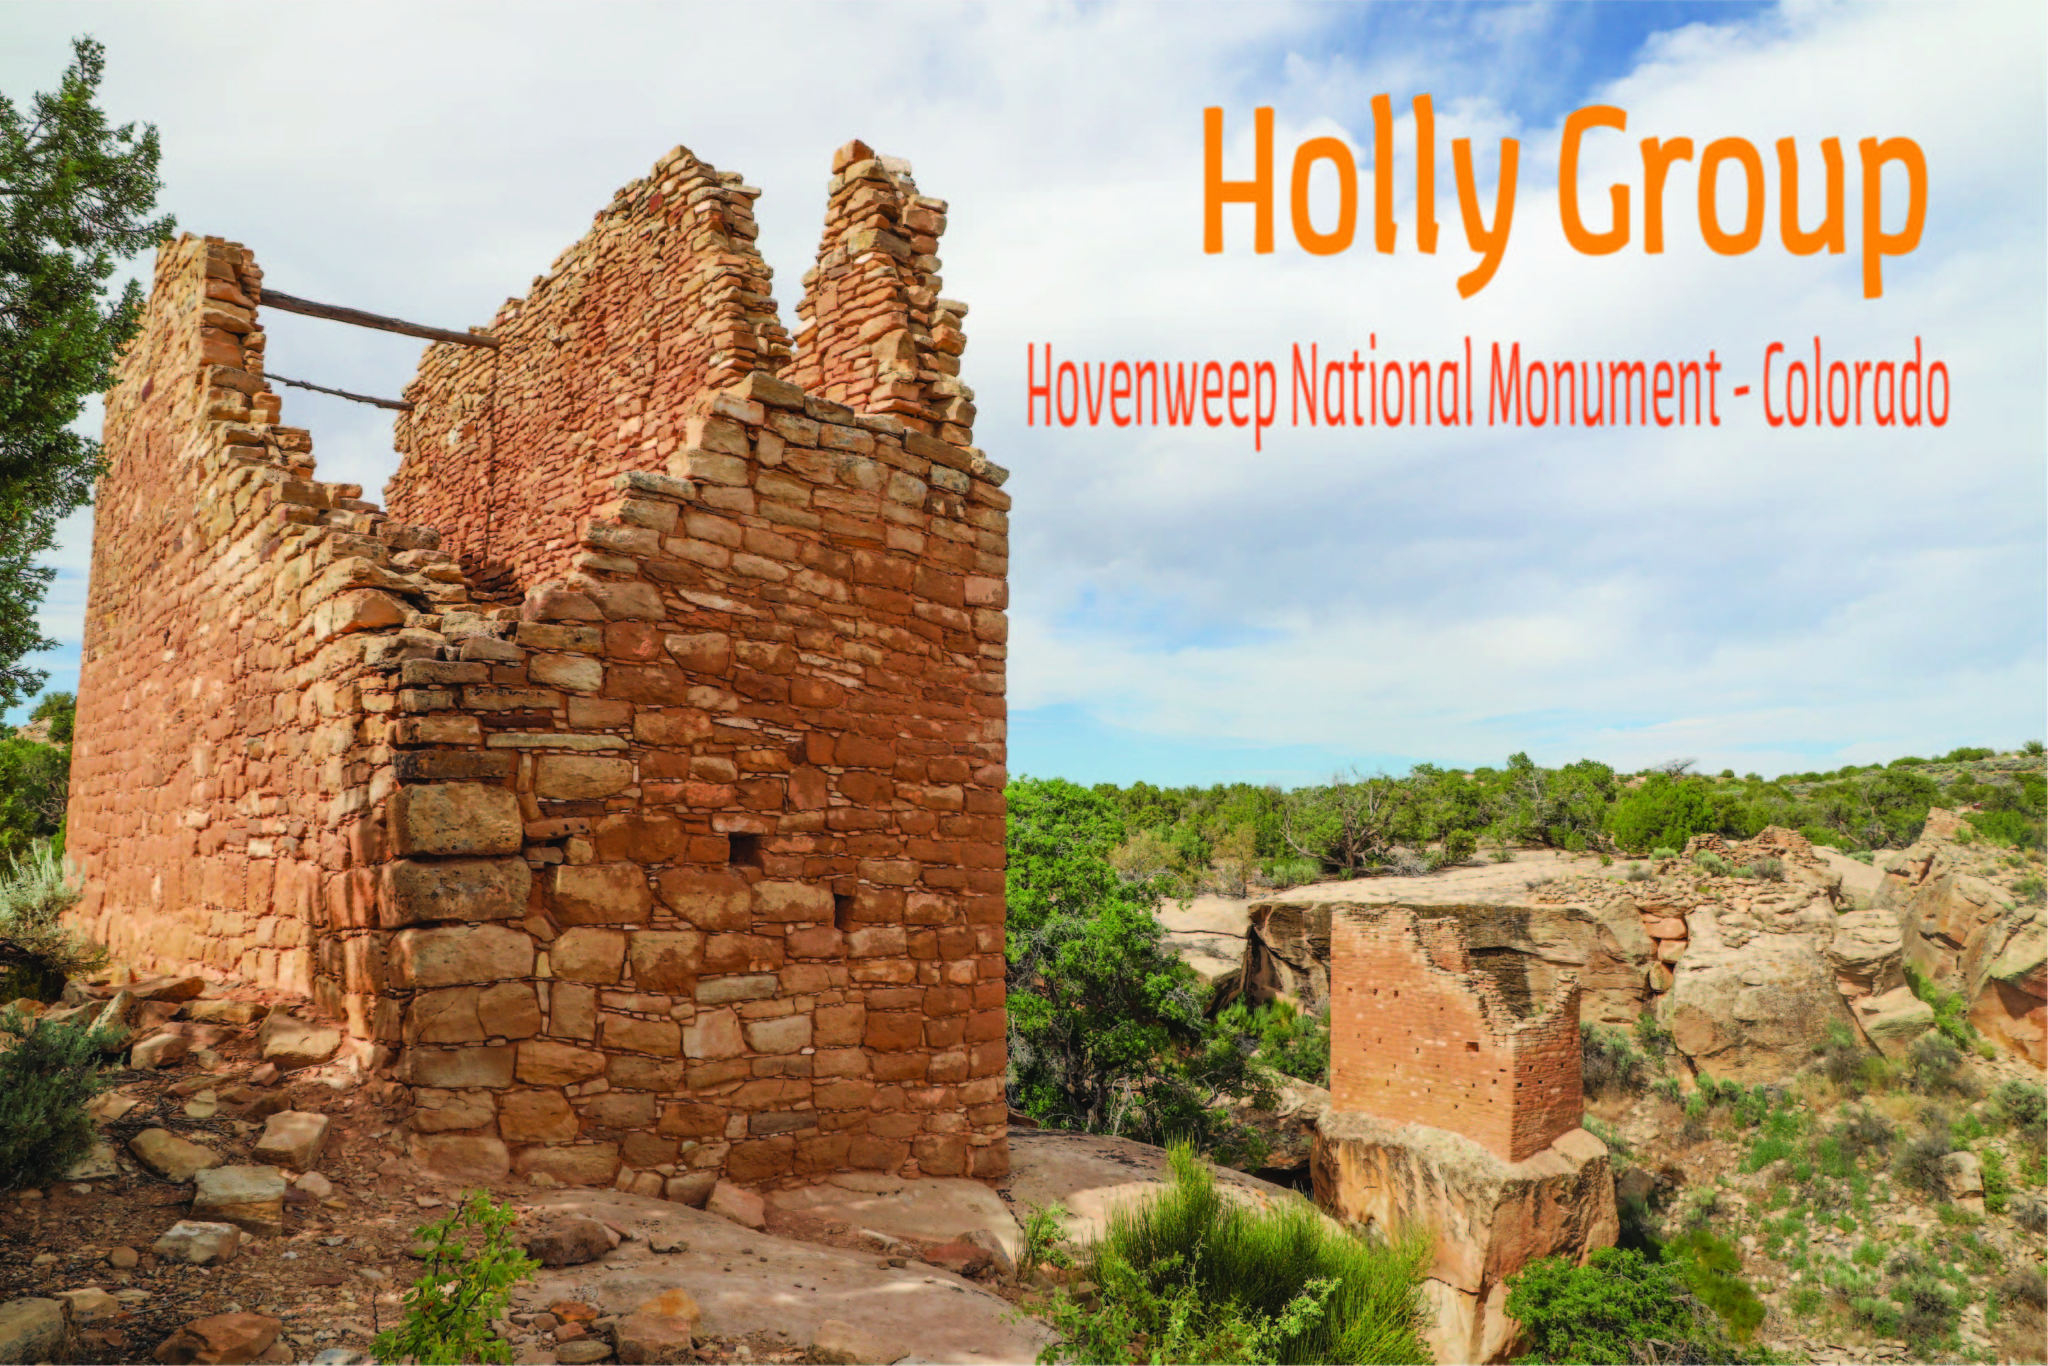 Holly Group – Hovenweep National Monument, Colorado